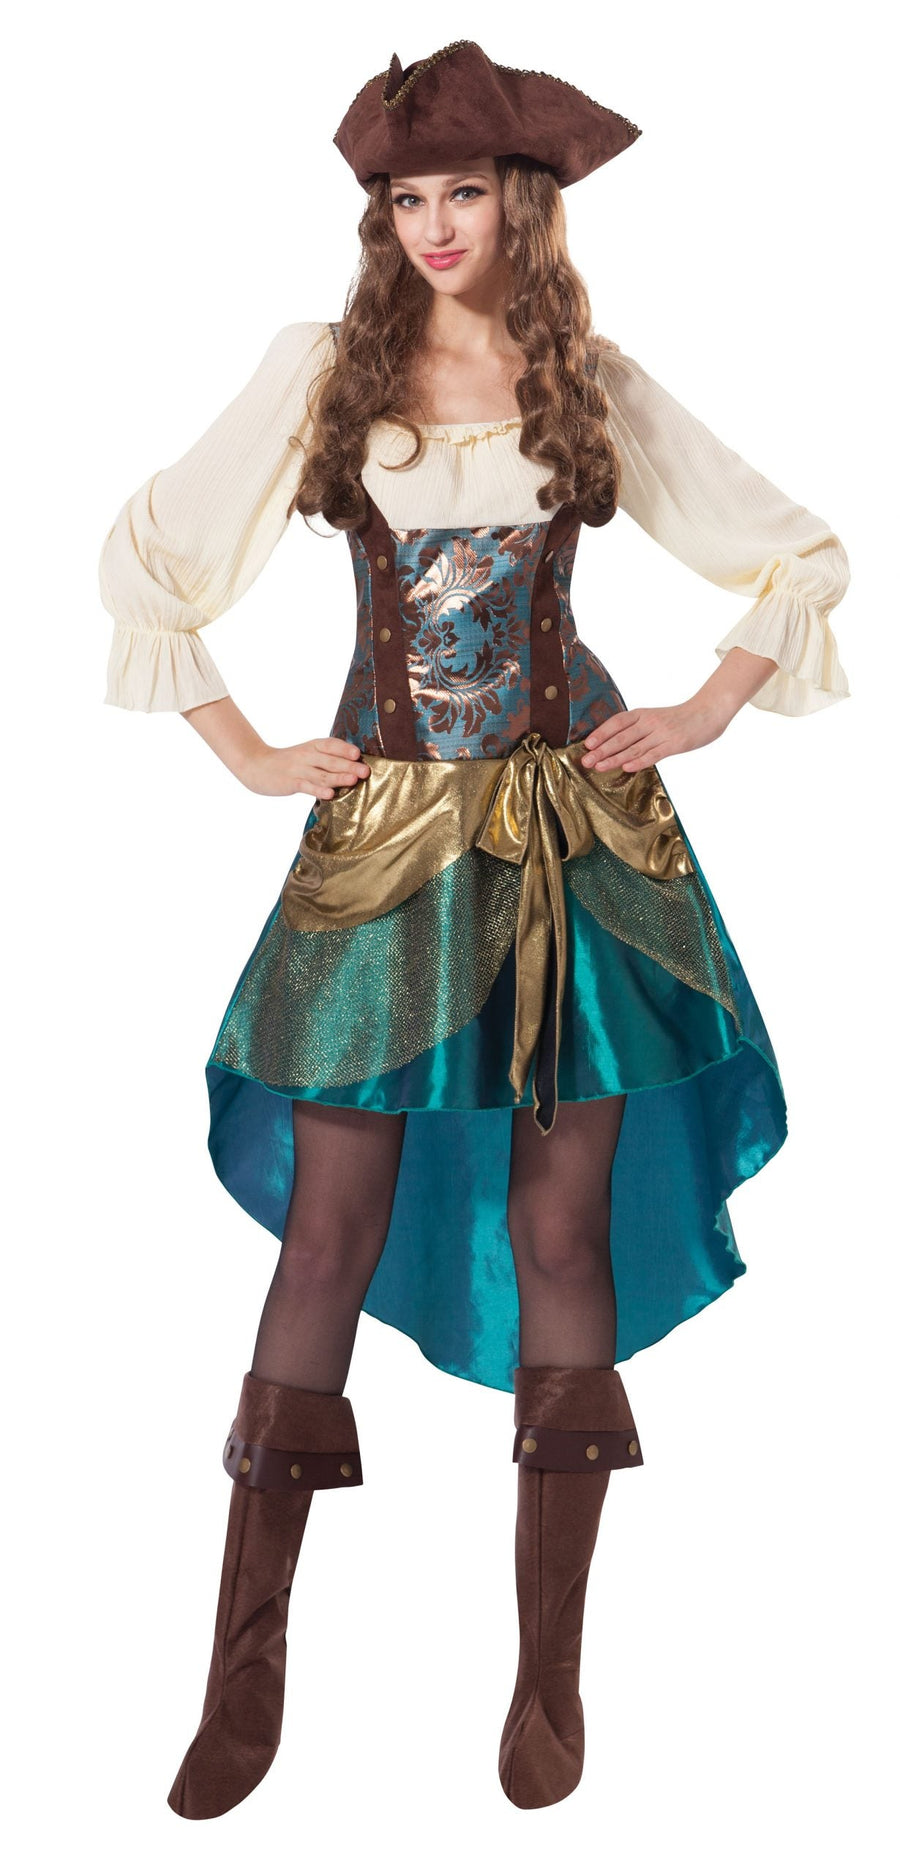 Pirate Princess Deluxe Adult Costume Female Uk Size 10 14_1